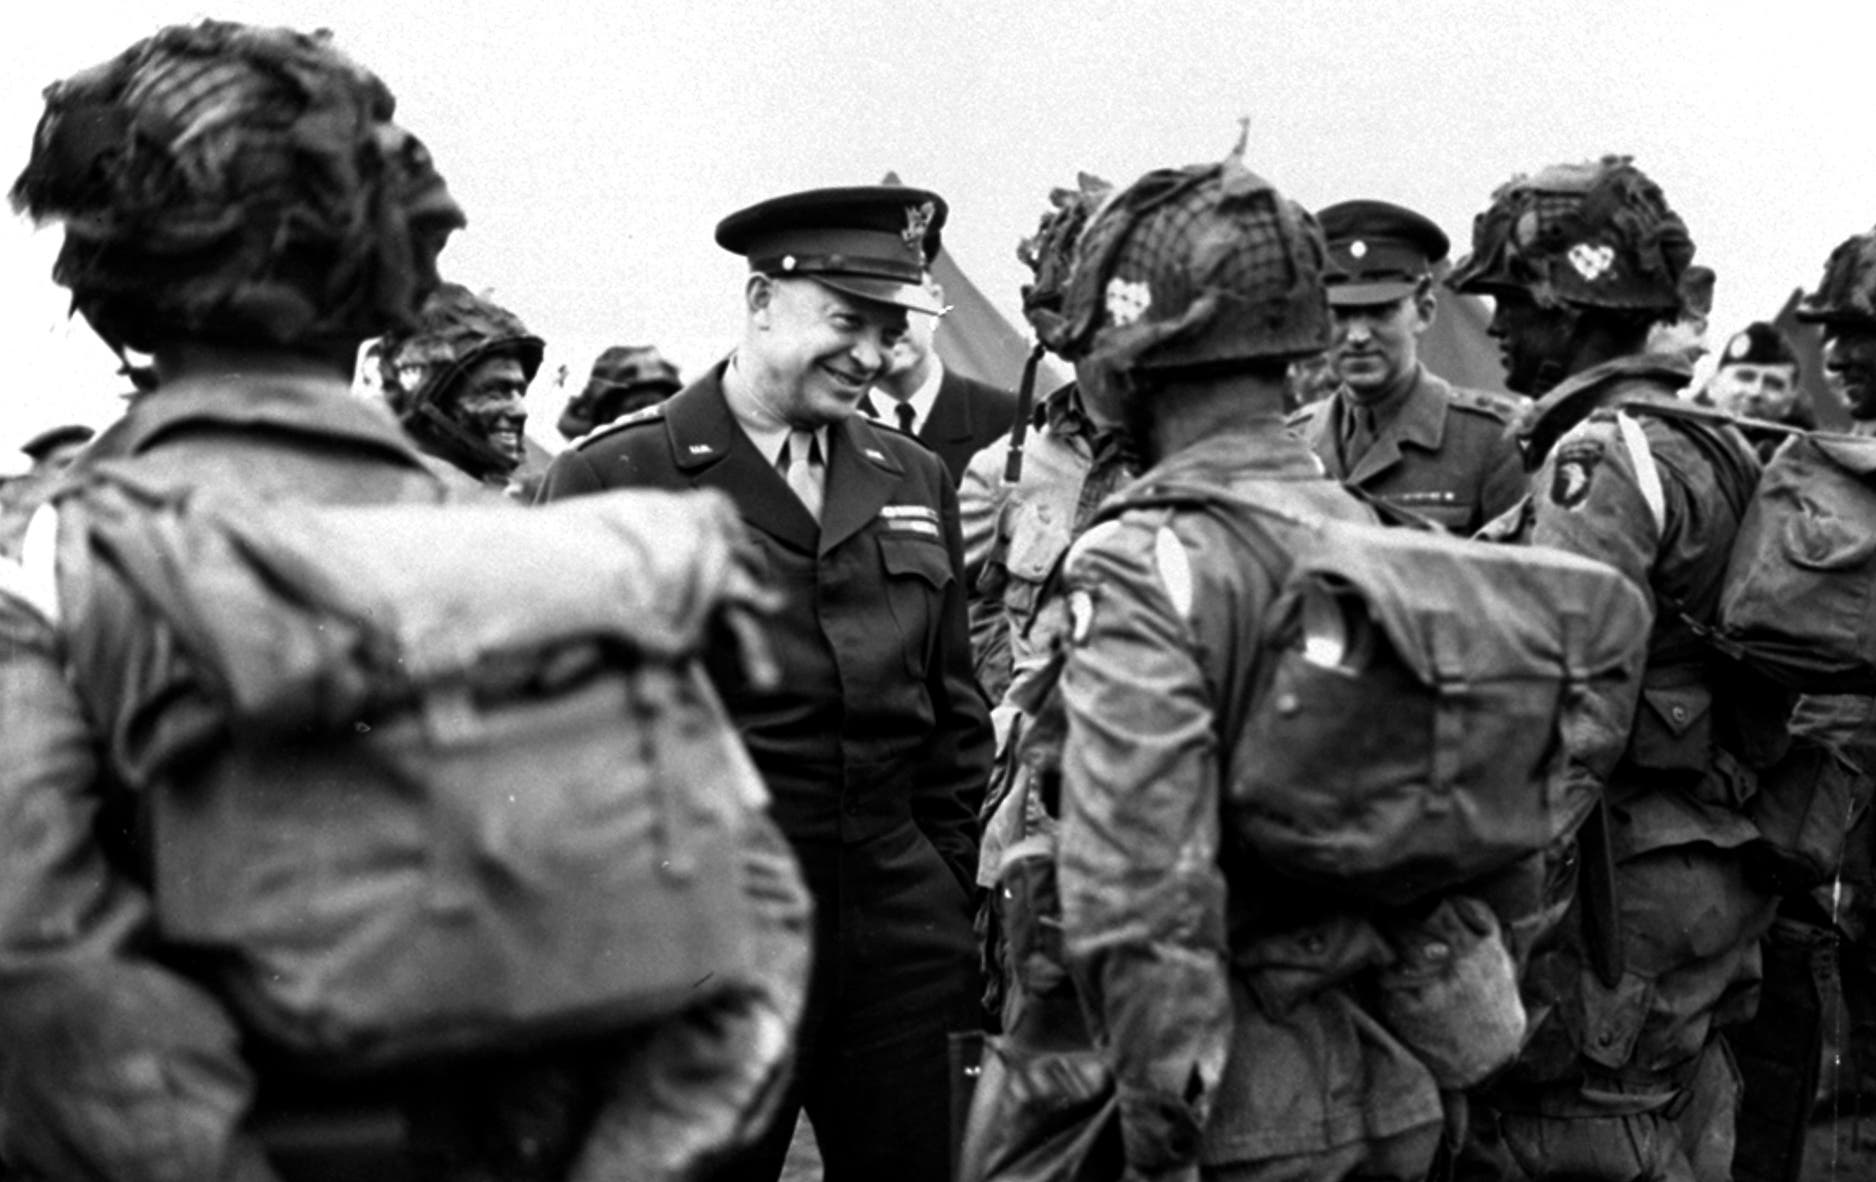 General Dwight Eisenhower assigns orders to paratroopers on D-Day